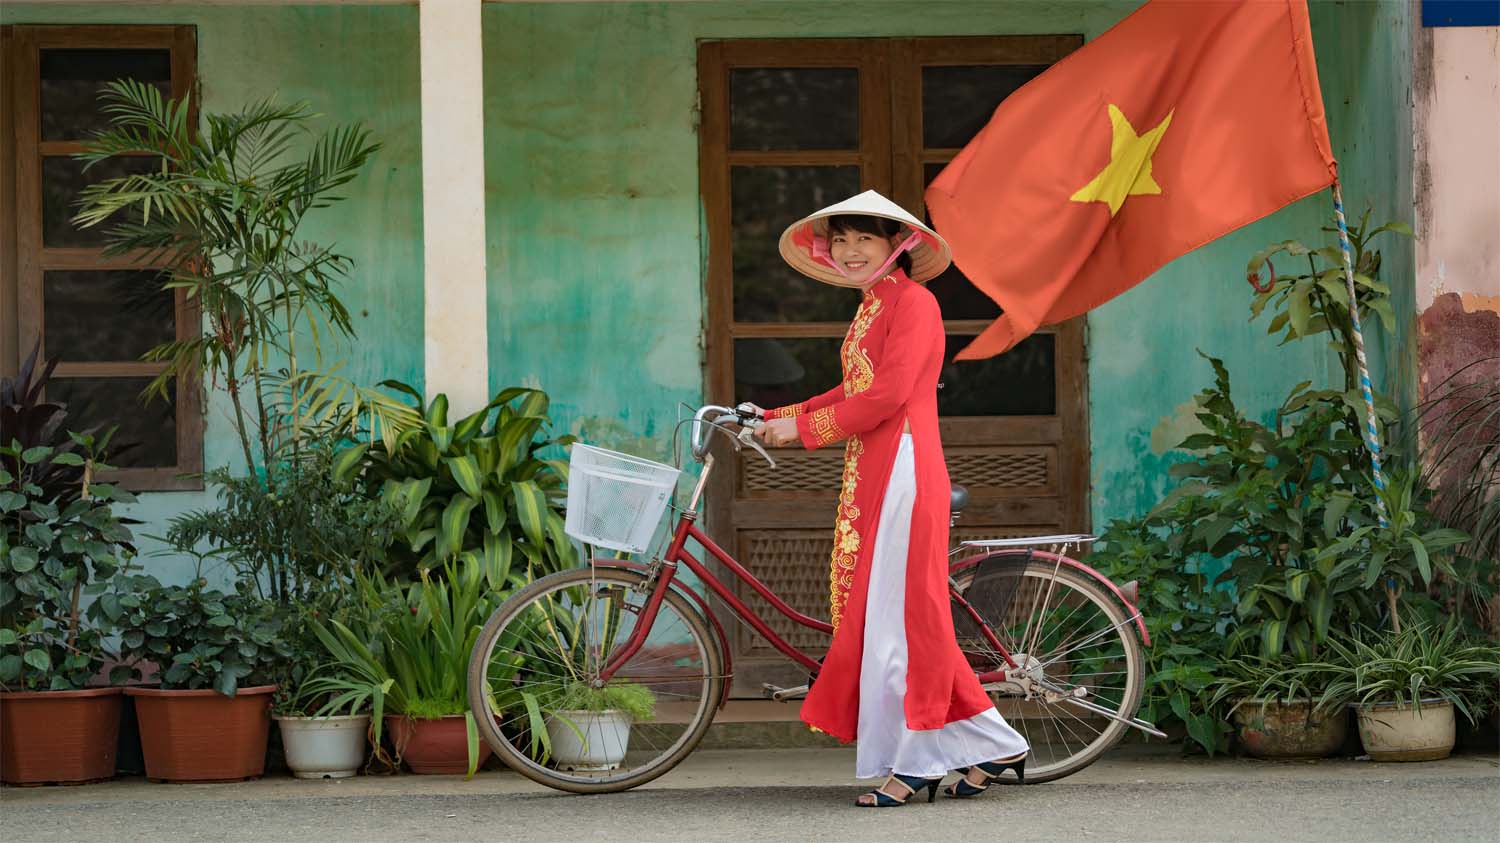 [ADRN Issue Briefing] Natural Disasters and Women’s Rights in Vietnam